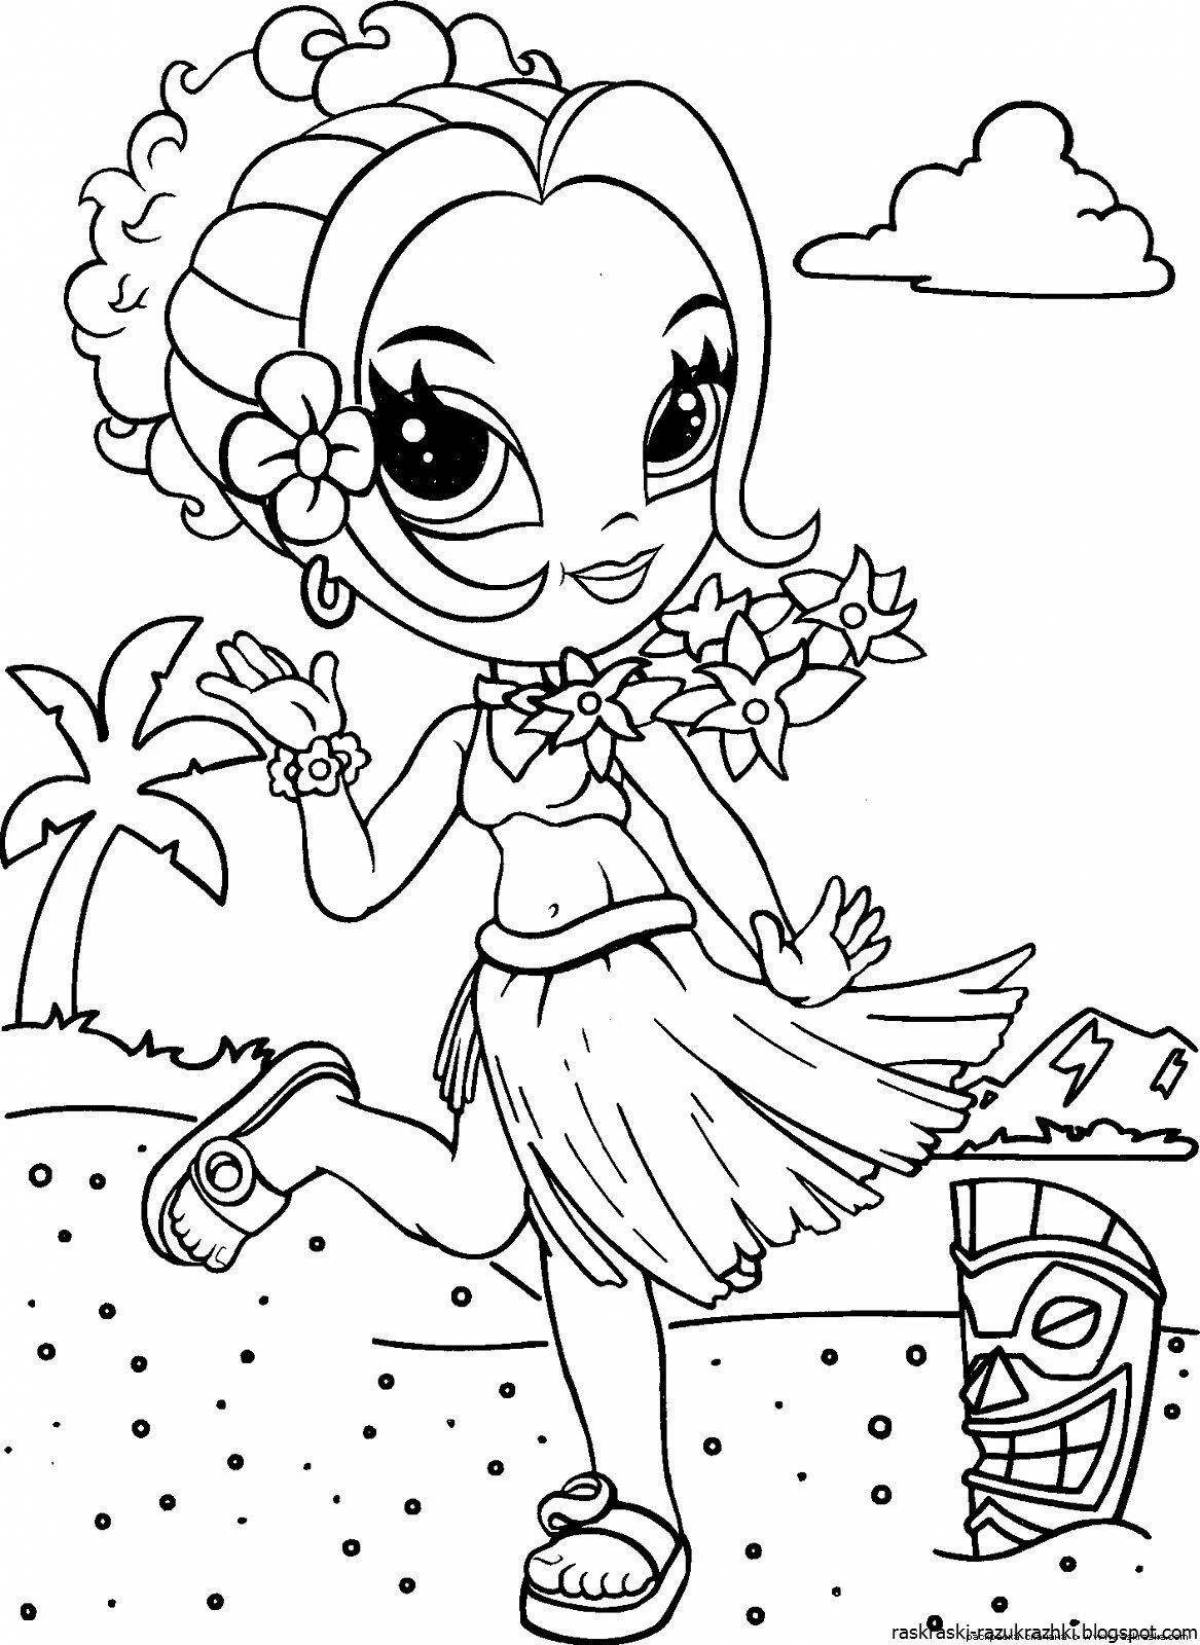 Glitter coloring book for girls 6-7 years old